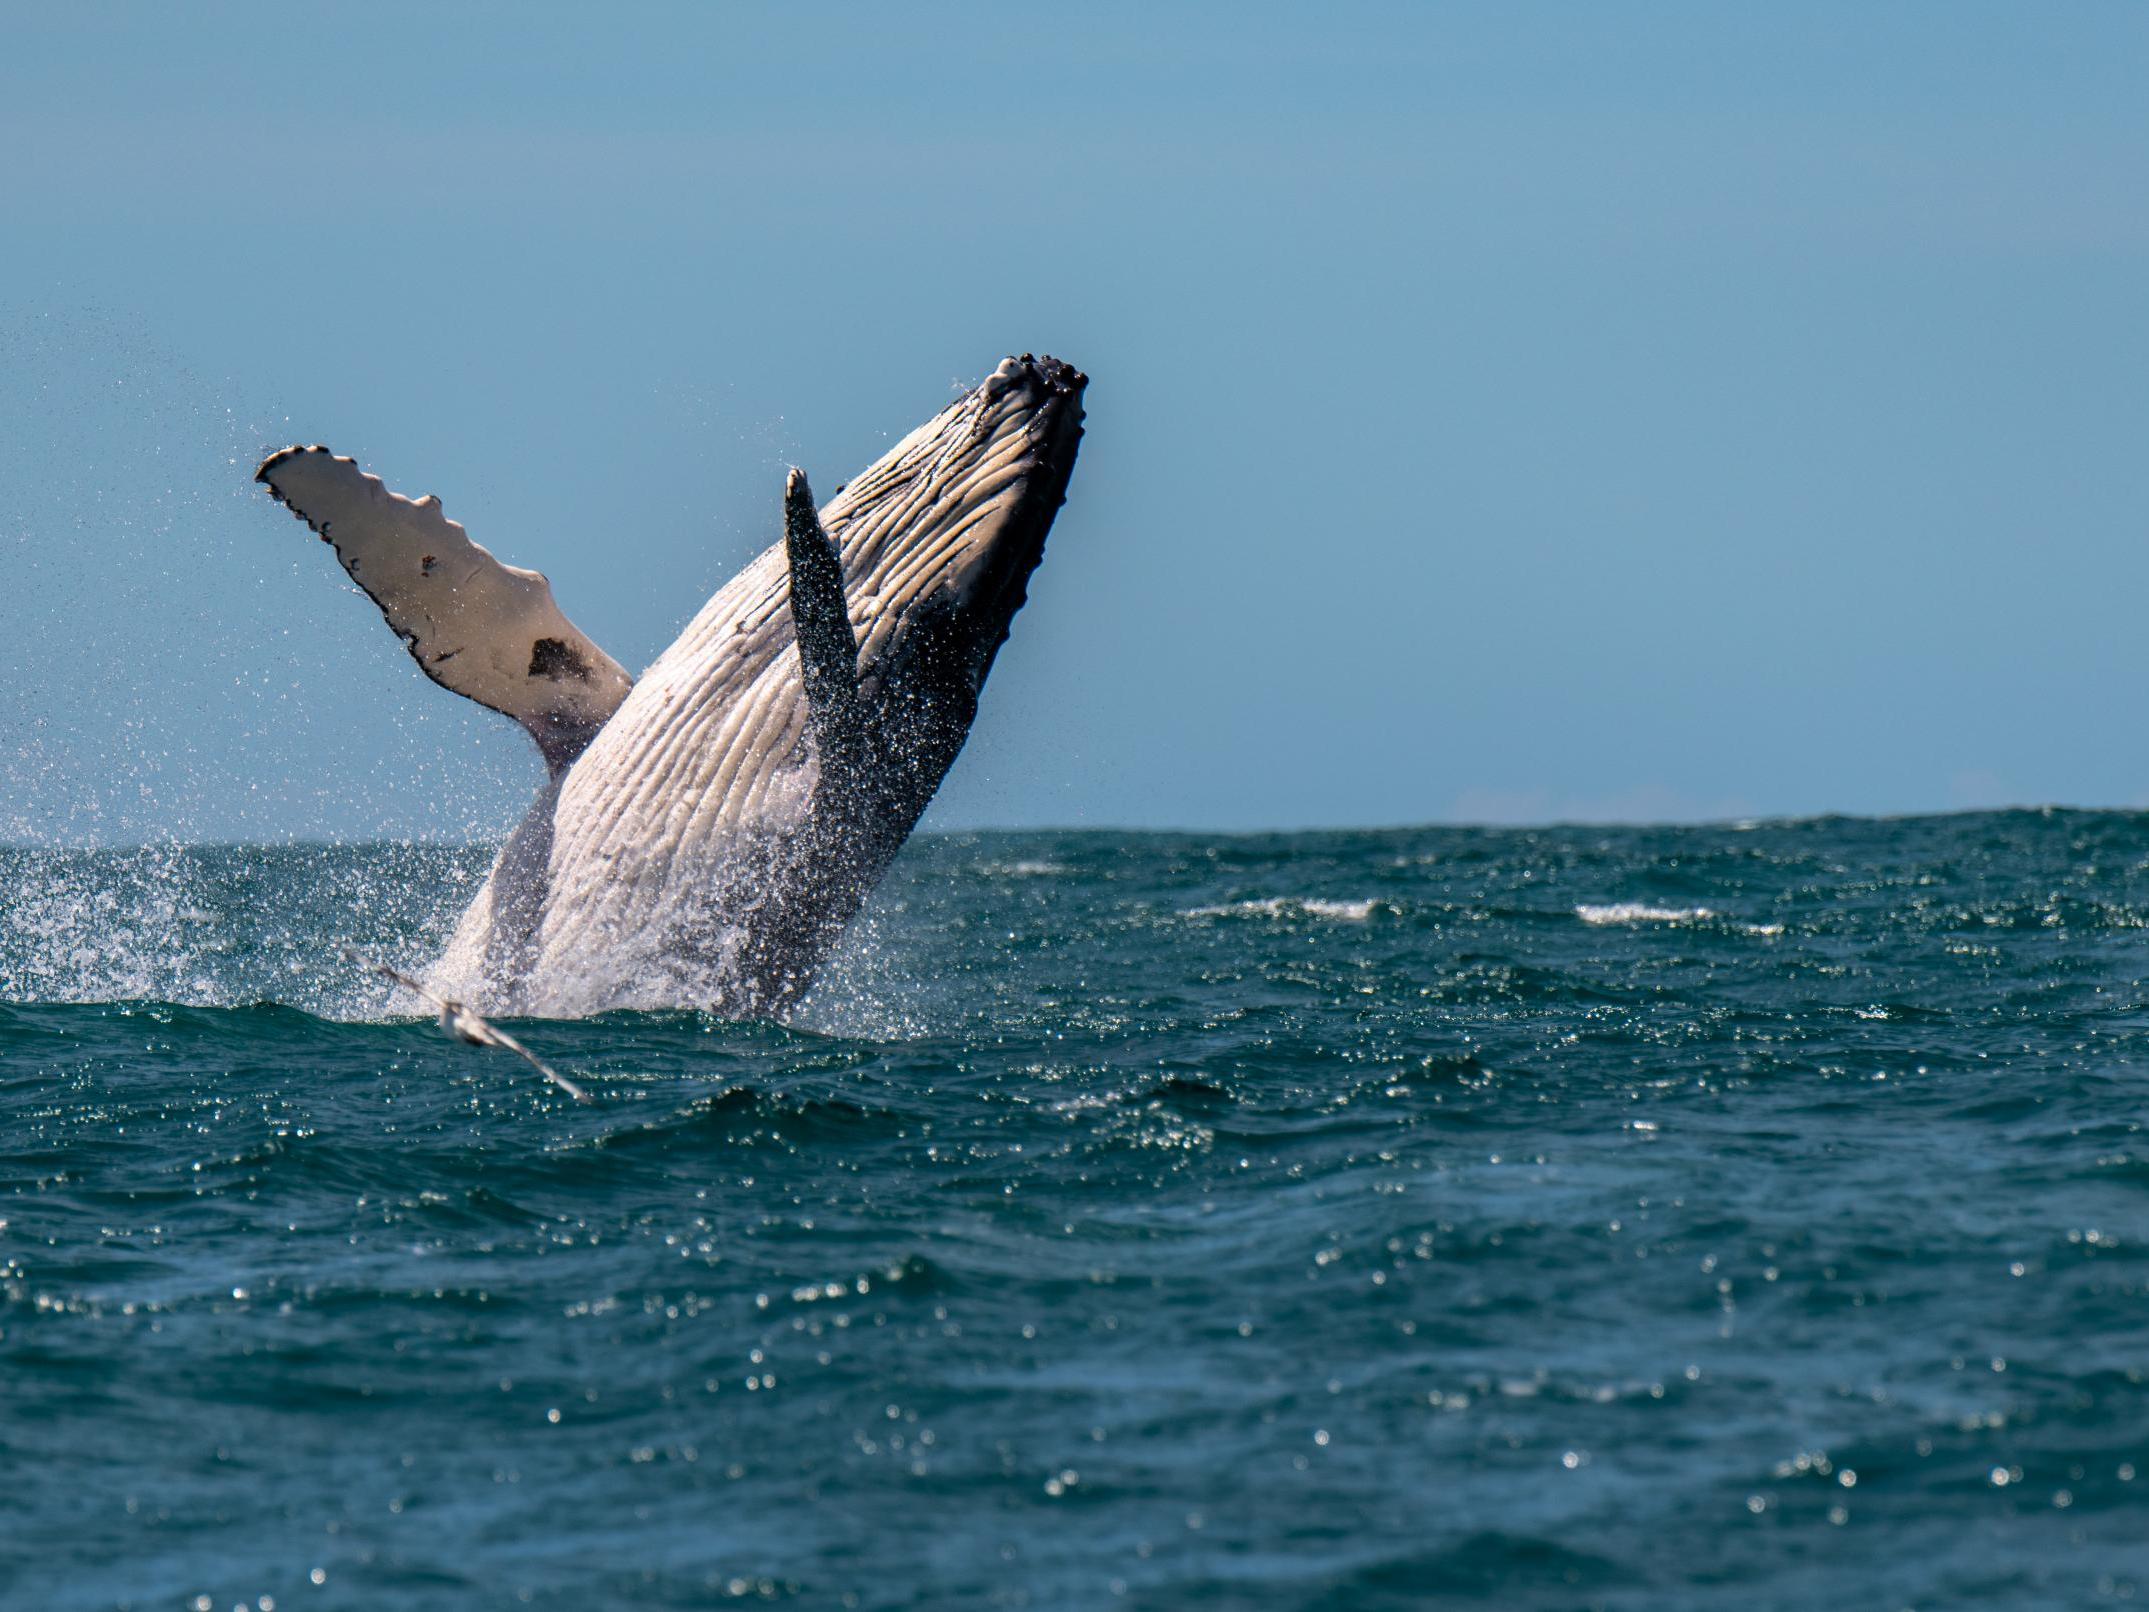 A woman has been injured after being hit by a humpback whale off the coast of Australia